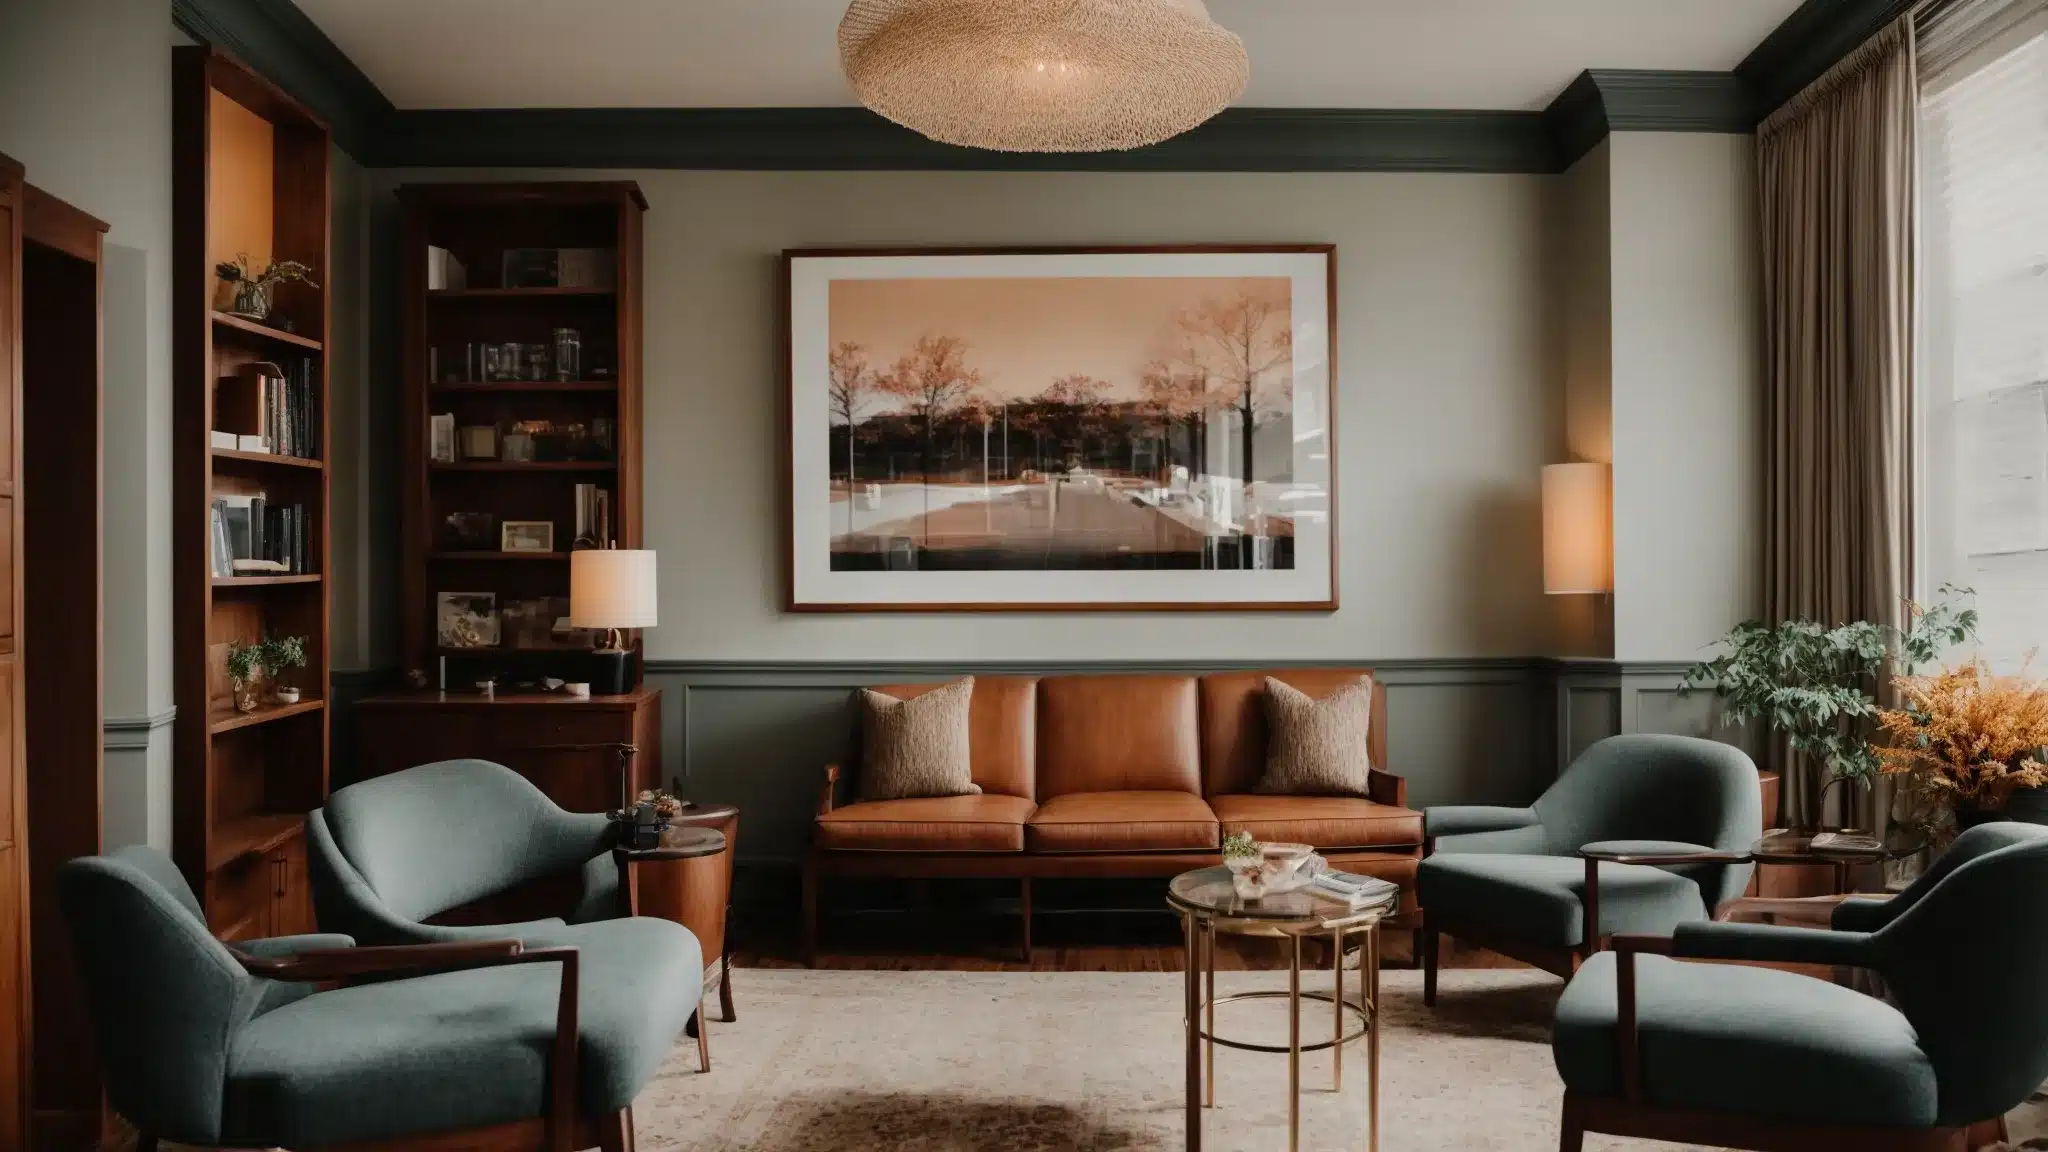 a welcoming therapist's office with cozy chairs and a warm, inviting decor, situated in washington dc.